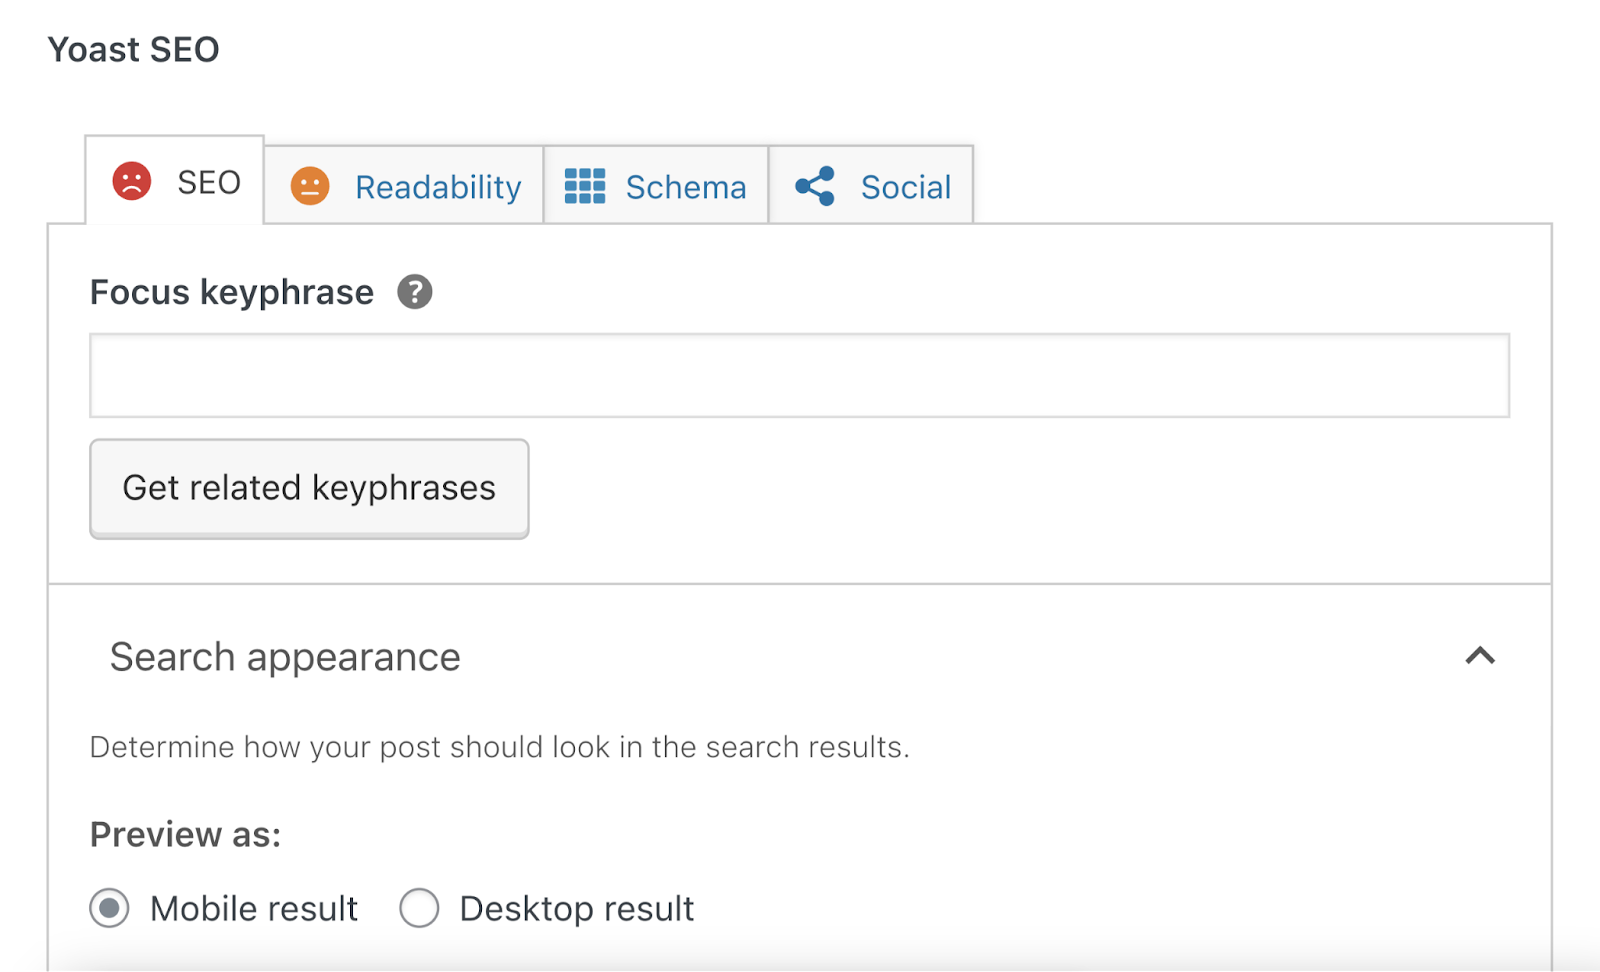 "Focus keyphrase" section in Yoast SEO page